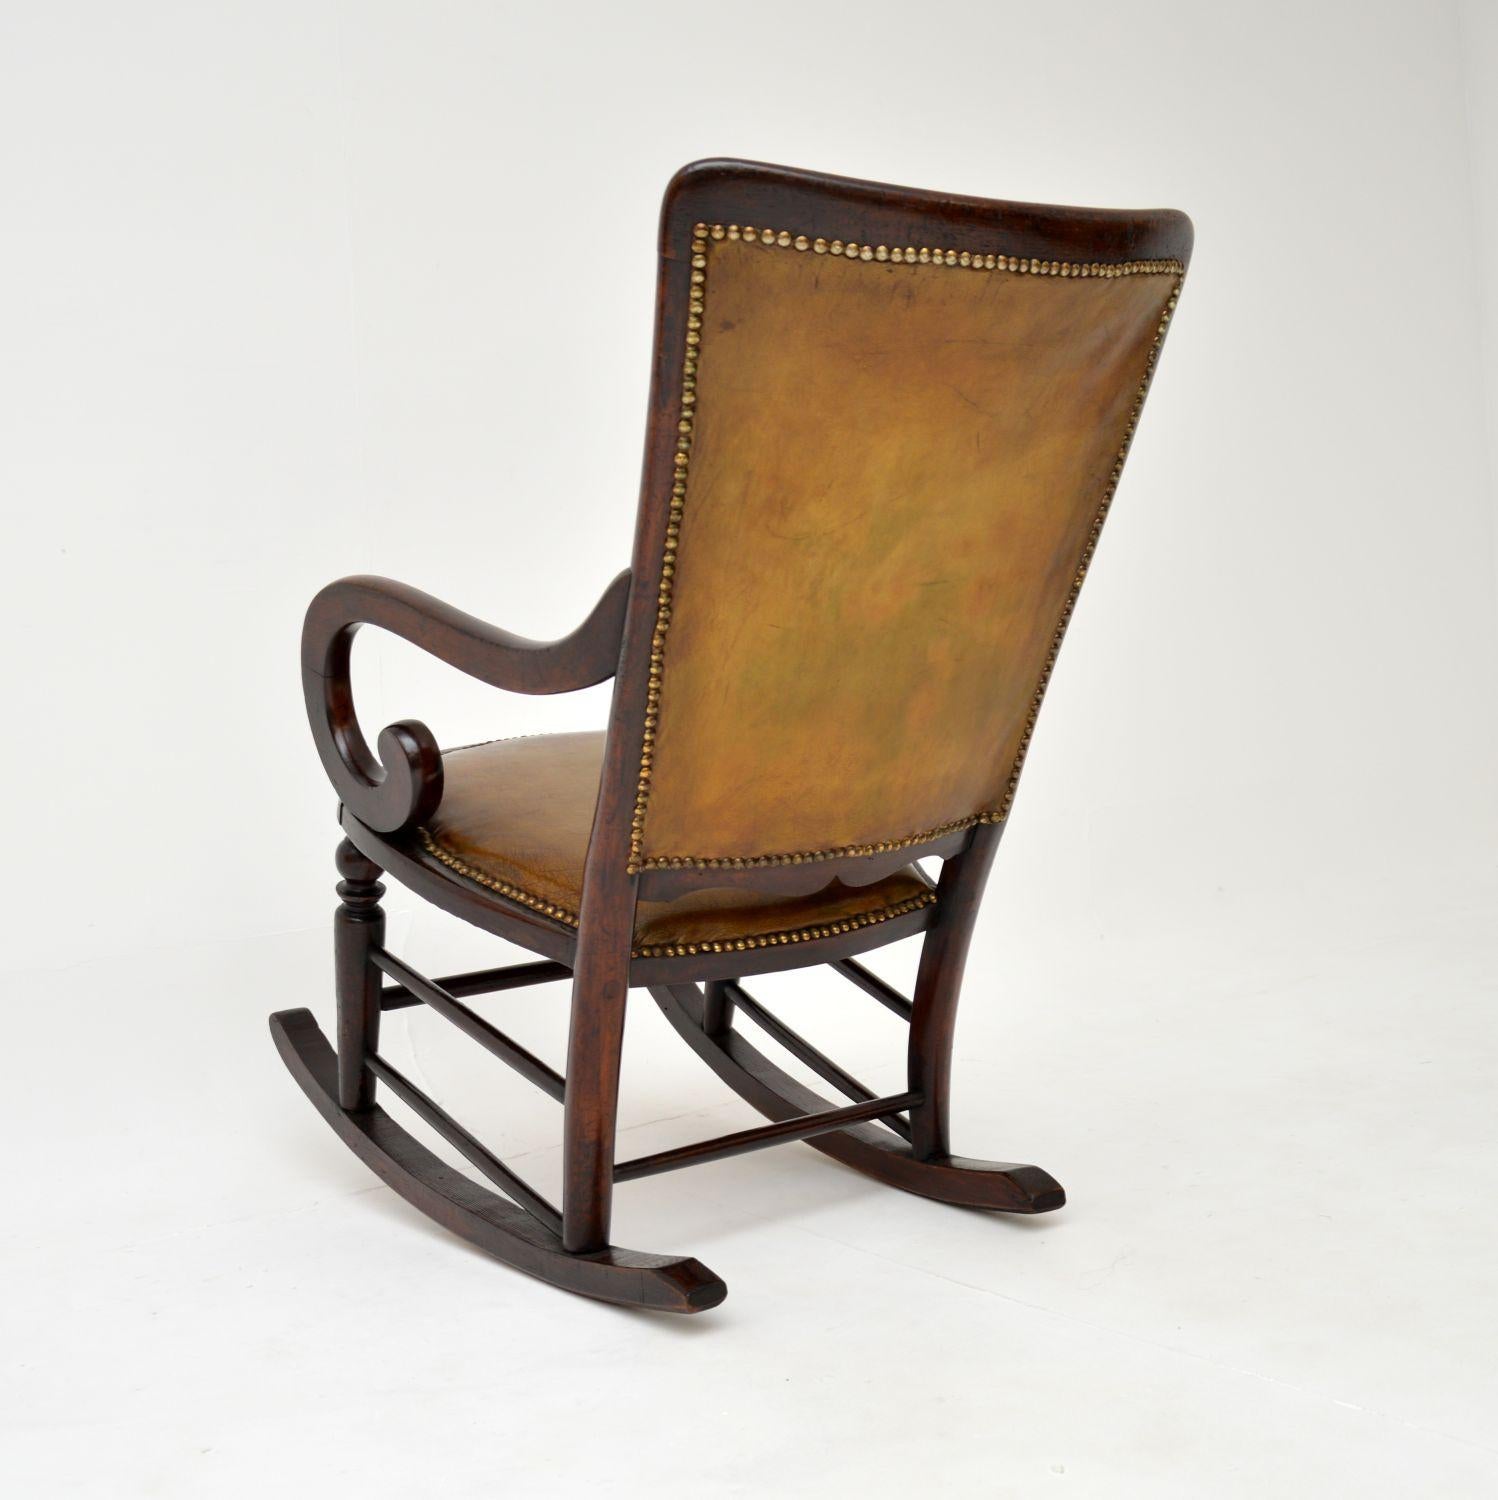 British Antique Victorian Leather Rocking Chair For Sale